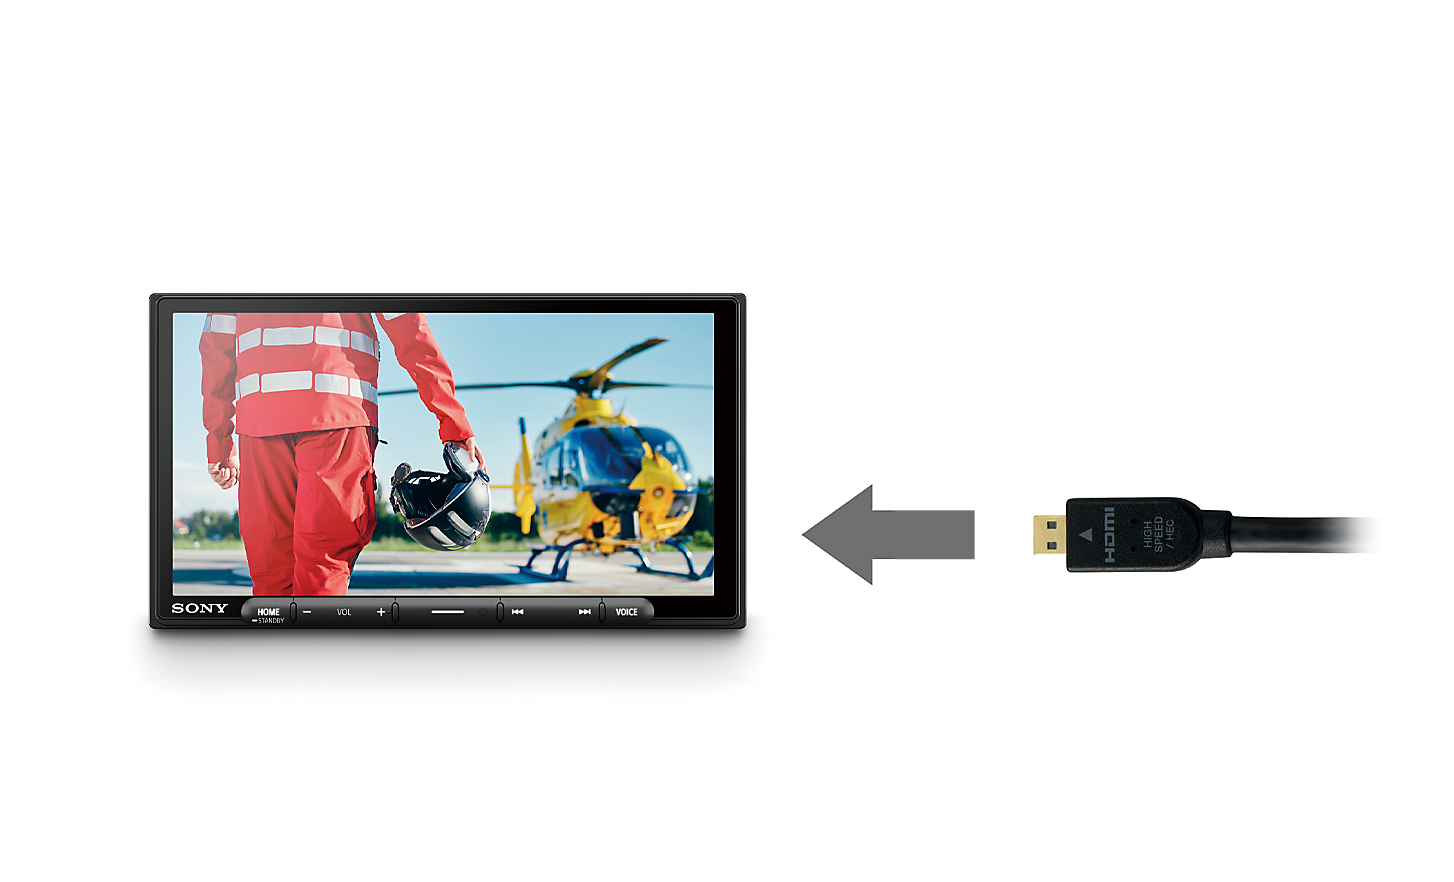 Image of a HDMI cable with an arrow pointing towards the XAV-AX6050 with a pilot and helicopter on-screen 